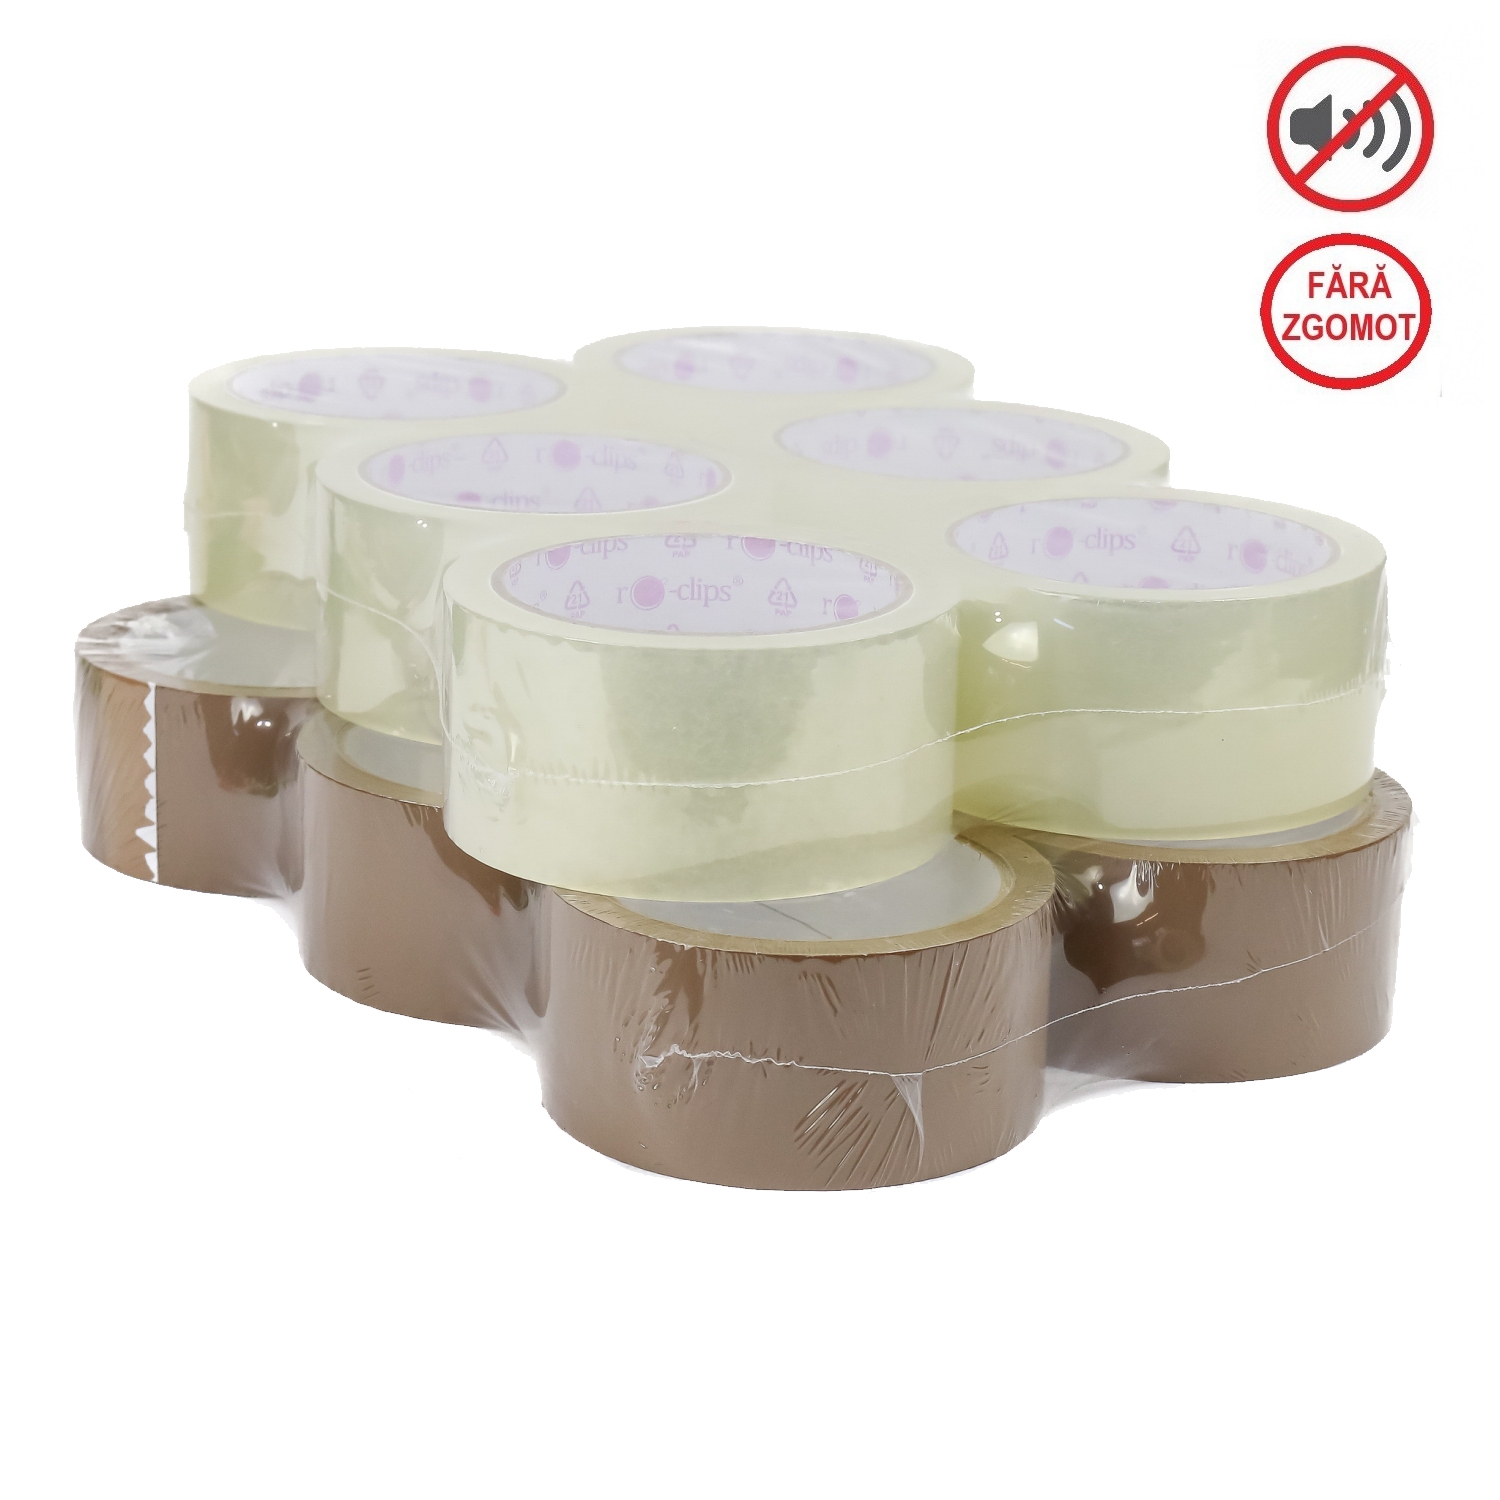 No Noise Scotch Tape (66 meters/roll)  - 6 rolls/pack